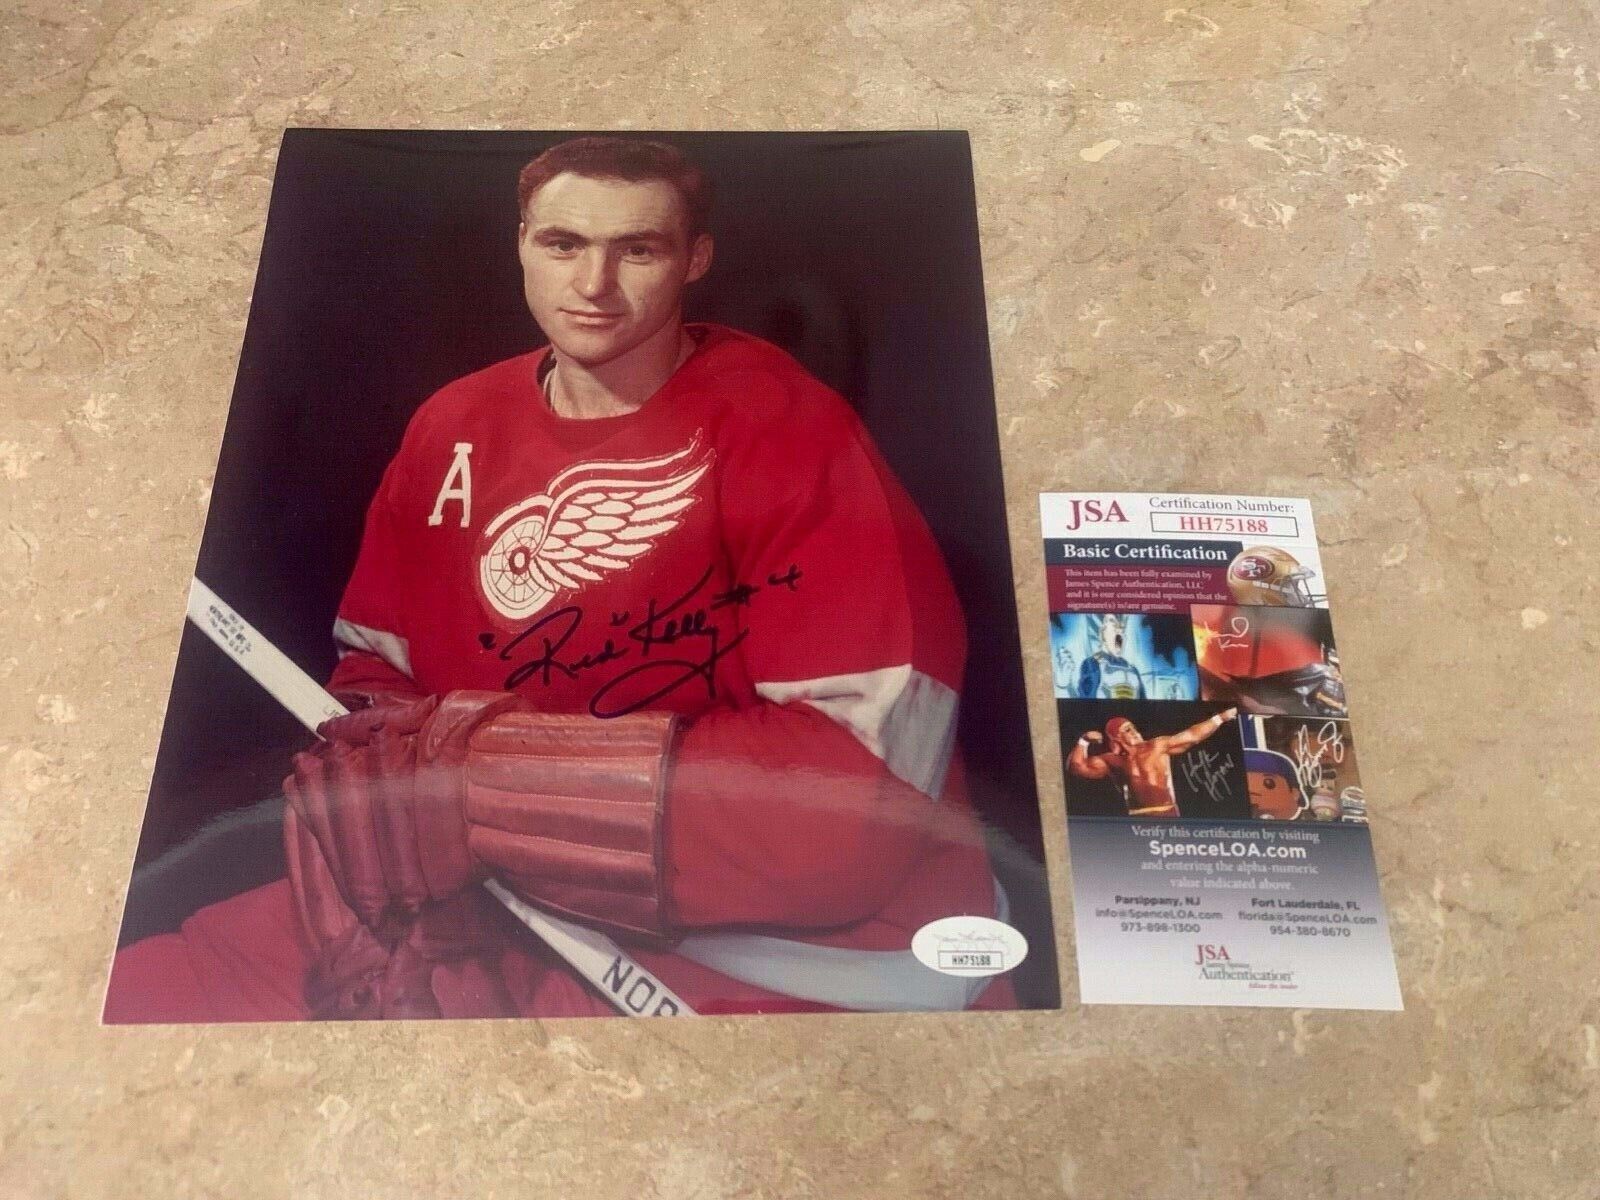 Red Kelly Detroit Red Wings Autographed 8x10 Hockey Photo JSA COA HH75188